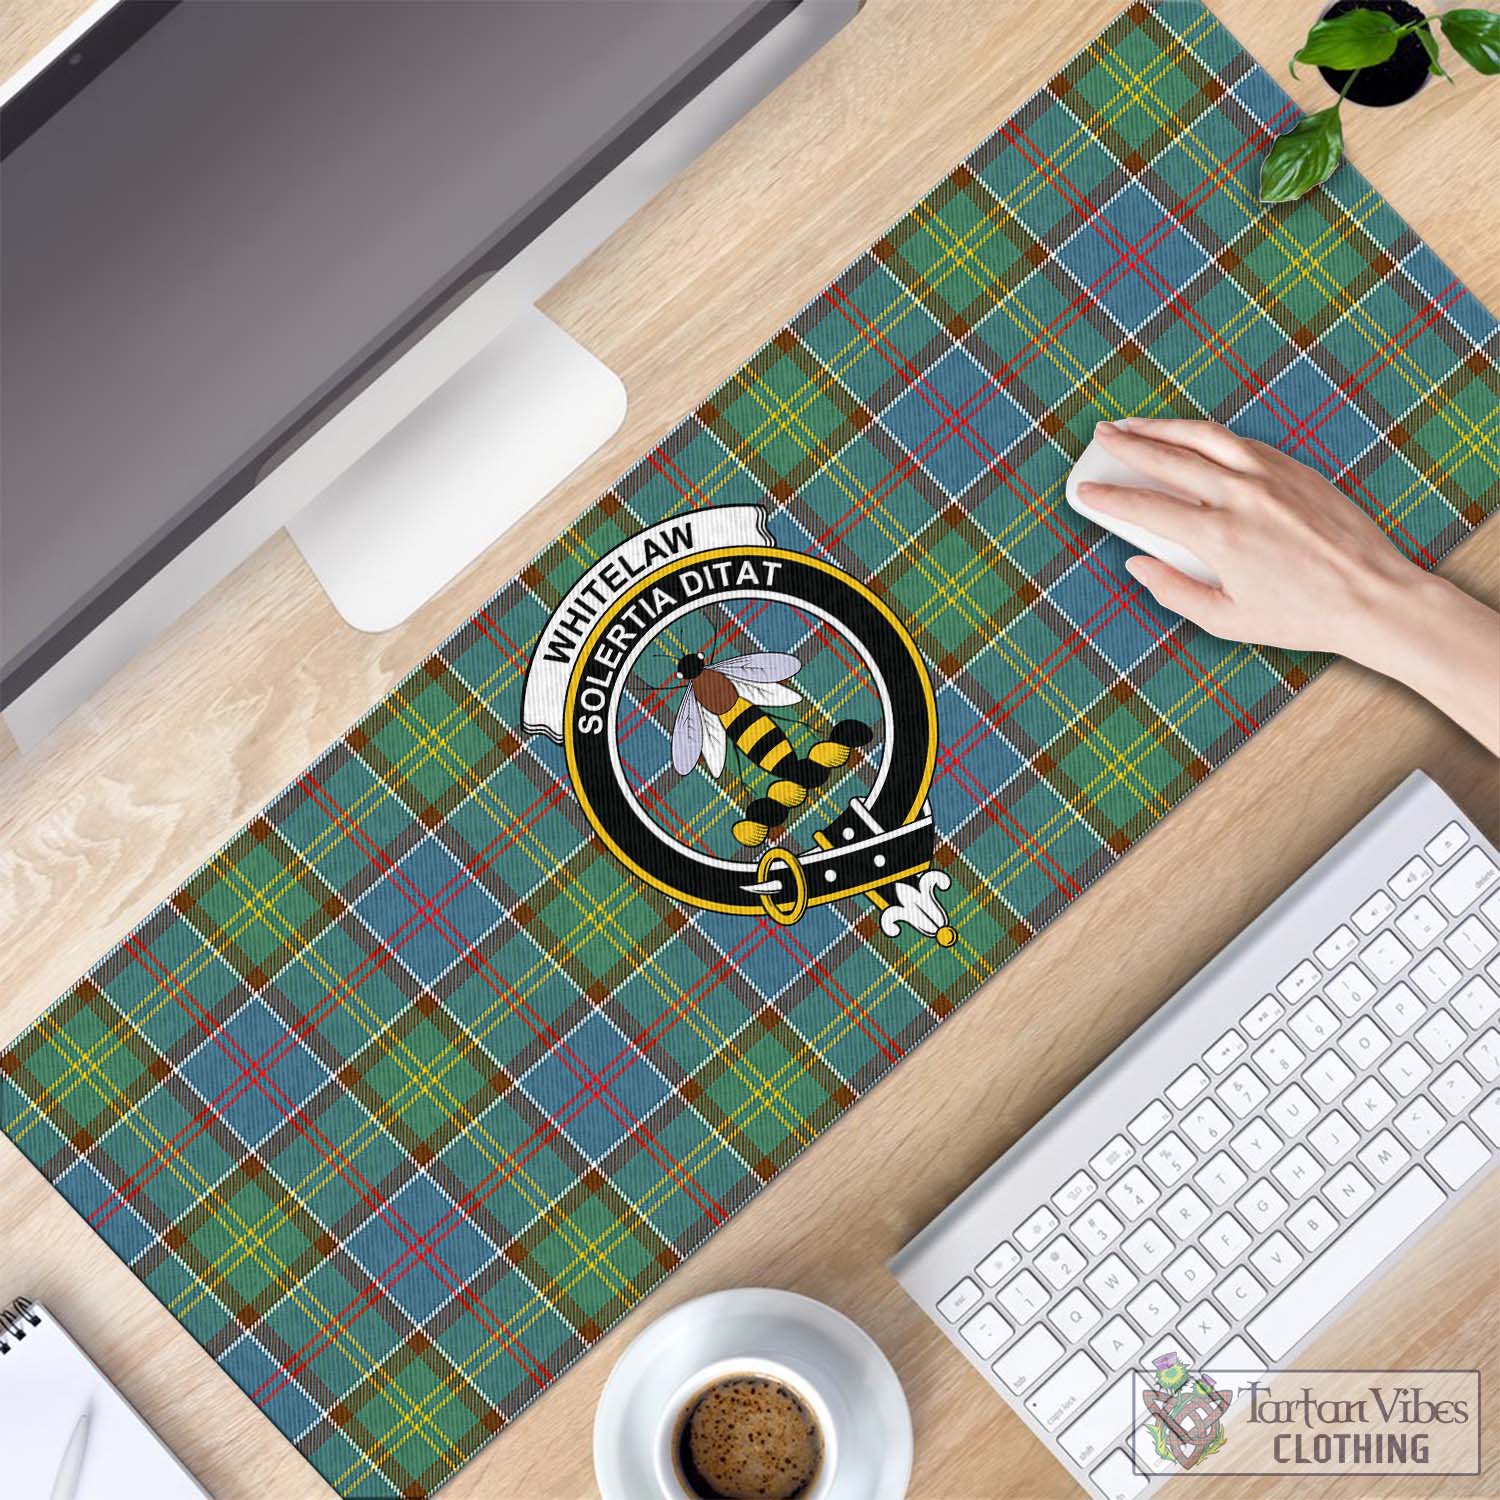 Tartan Vibes Clothing Whitelaw Tartan Mouse Pad with Family Crest